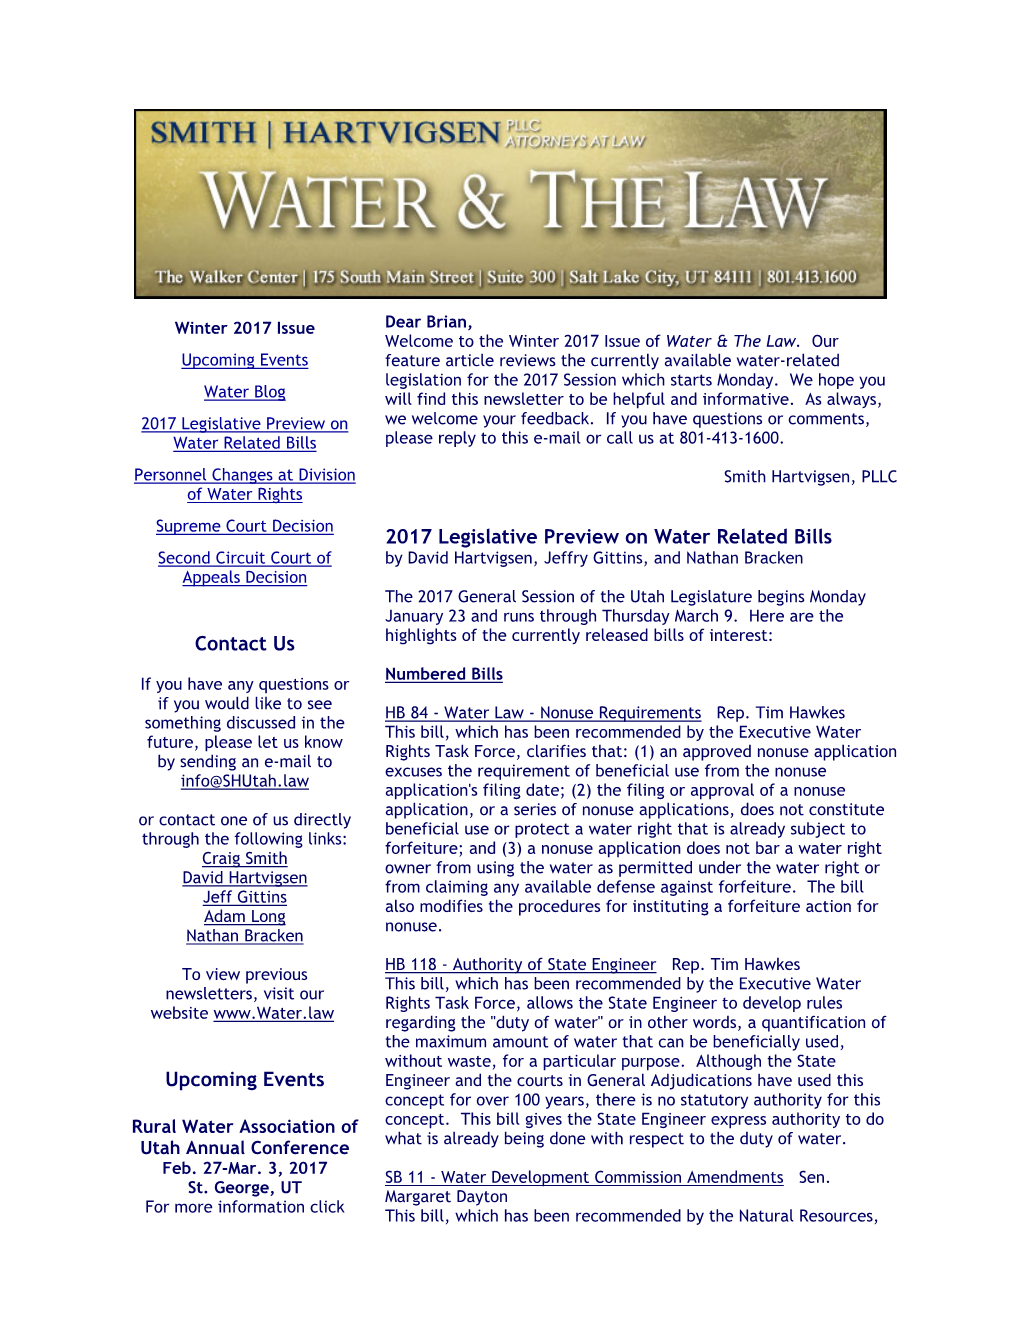 Winter 2017 Issue Dear Brian, Welcome to the Winter 2017 Issue of Water & the Law